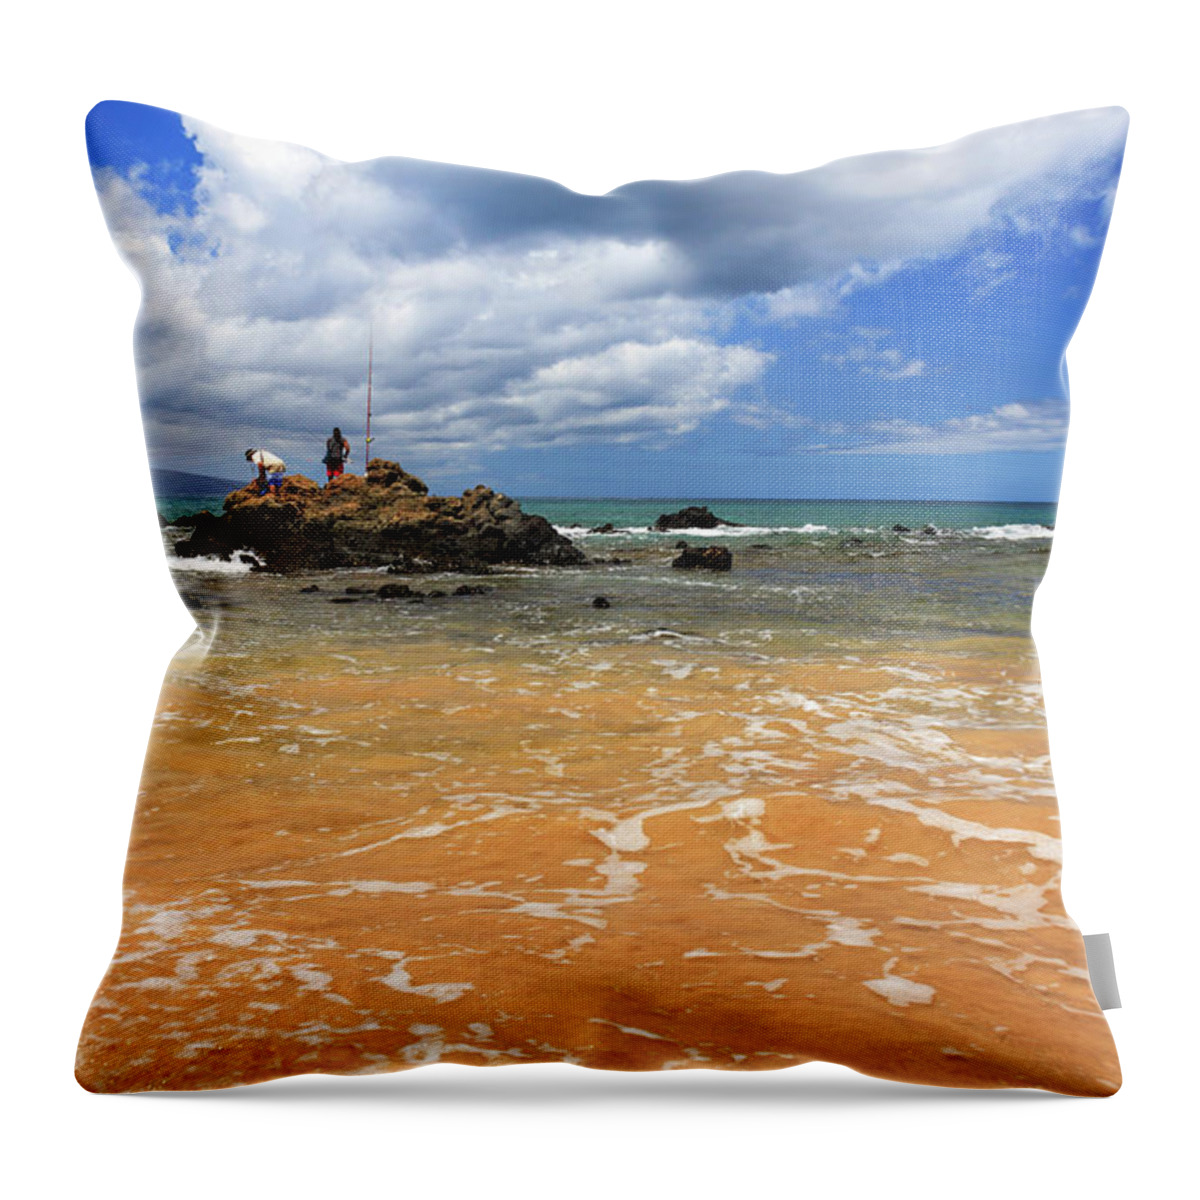 Fishing Throw Pillow featuring the photograph Fishing In Maui by James Eddy